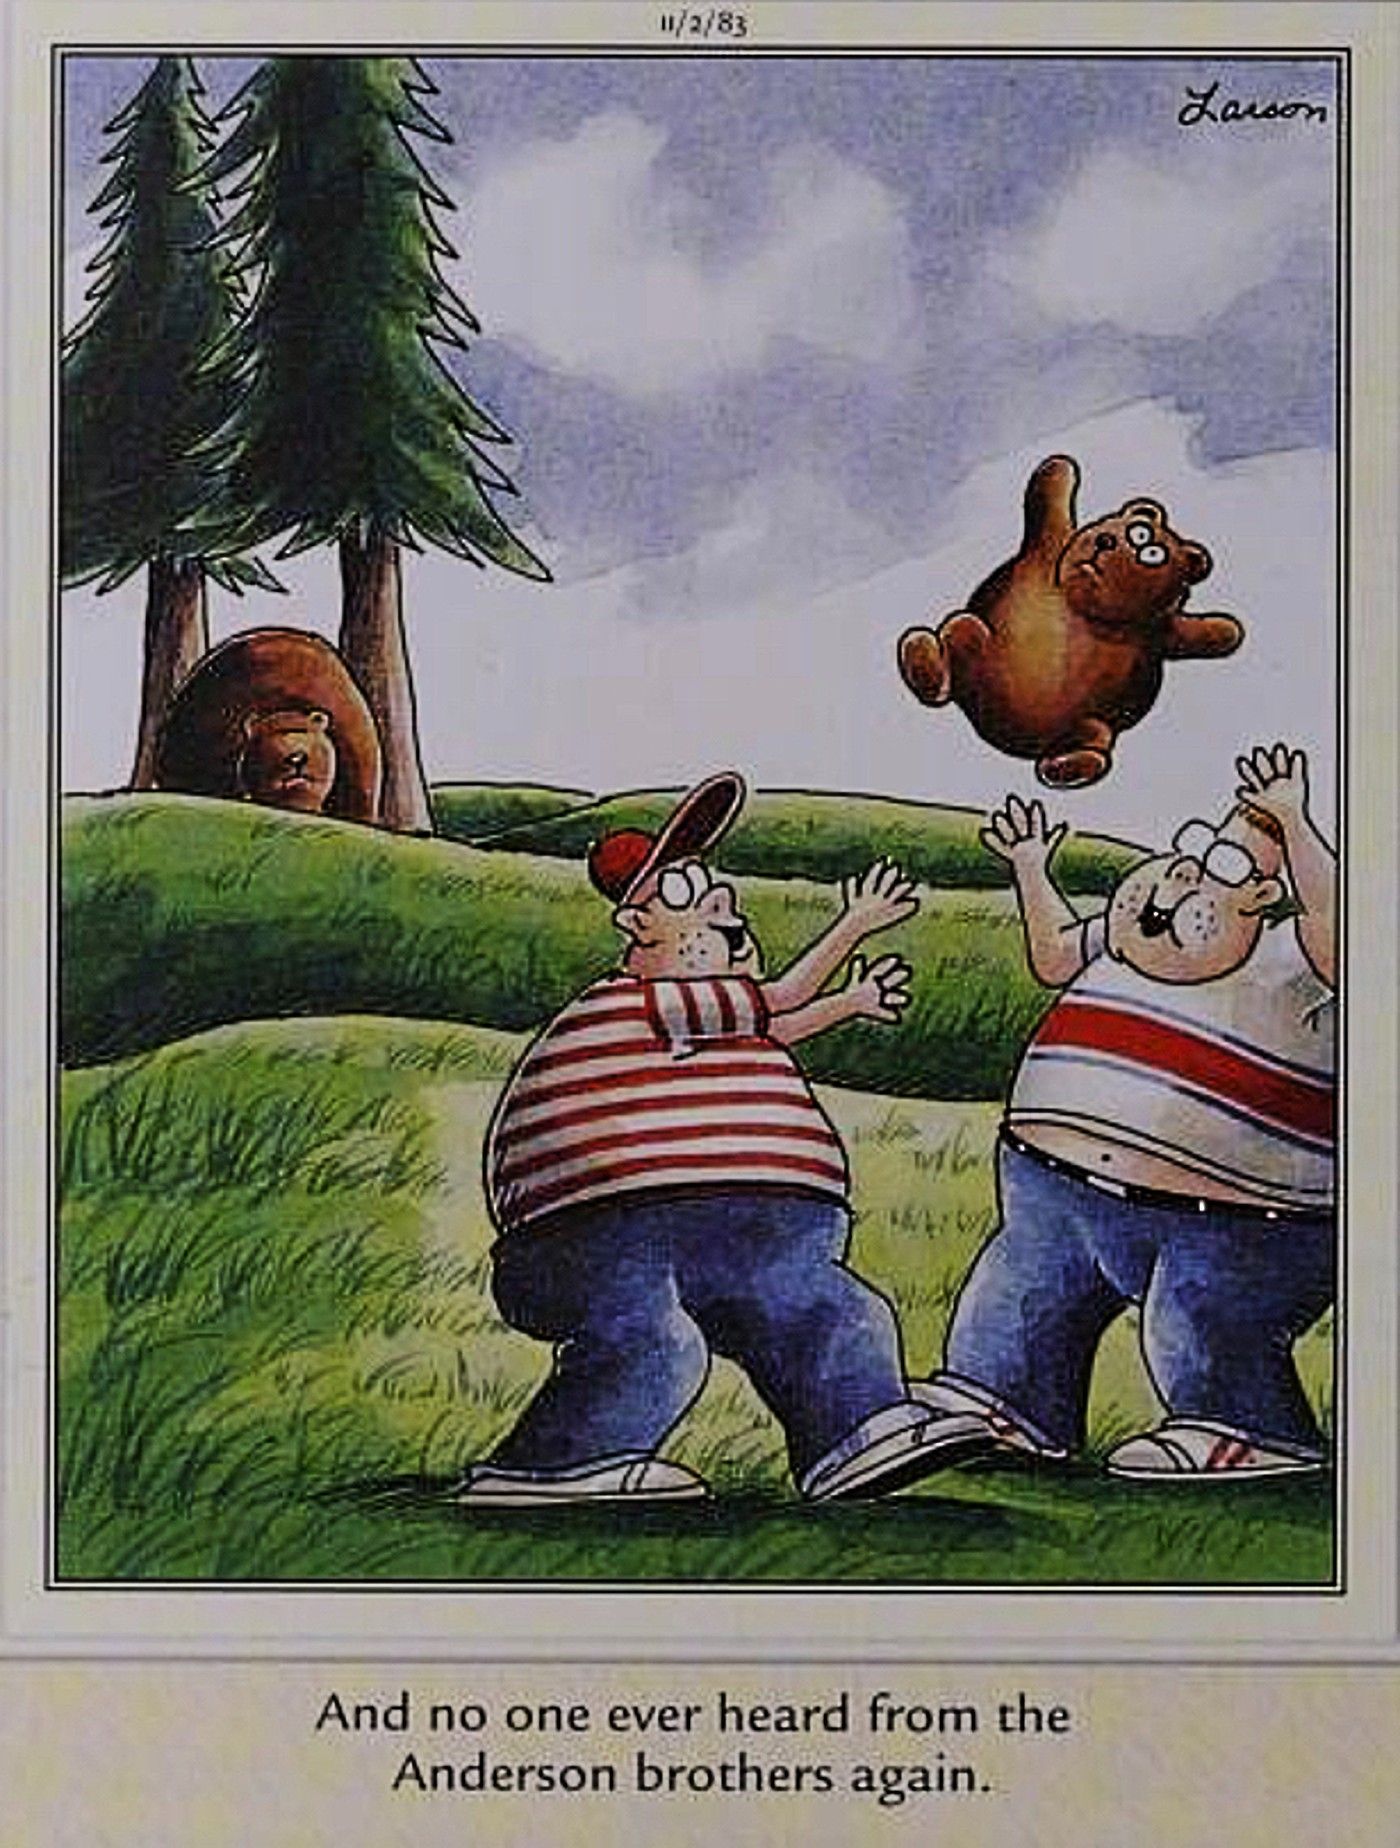 Far Side, foolish human kids playing with bear cub as mama bear approaches in background